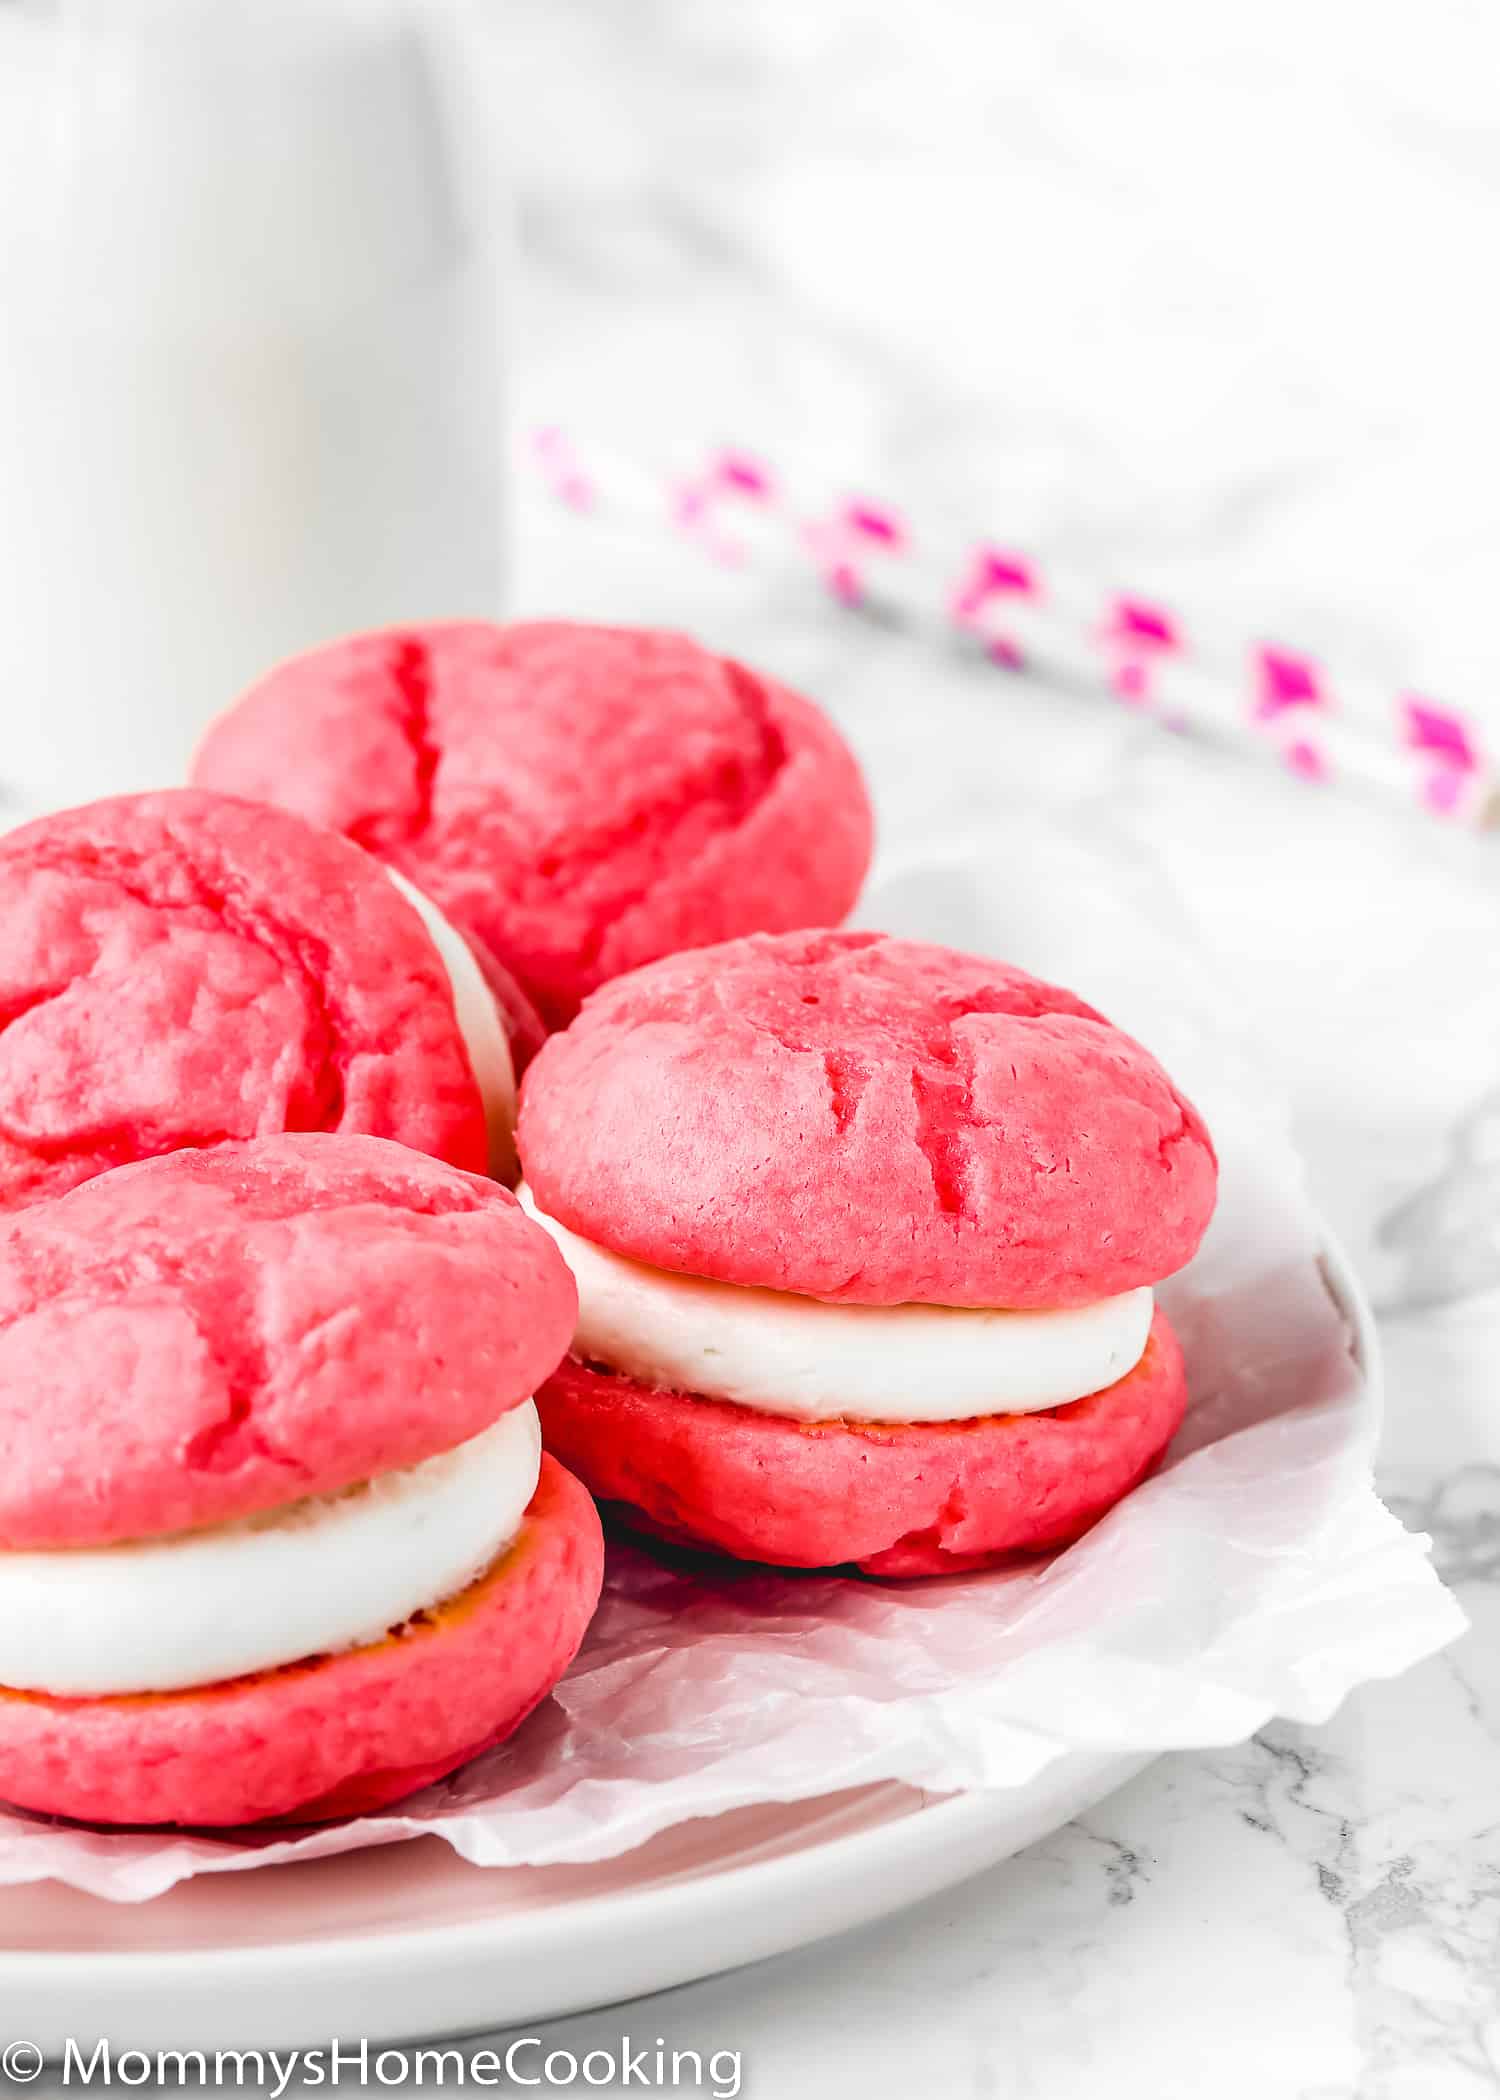 Eggless whoopie pies on a plate with a glass of milk in the background.